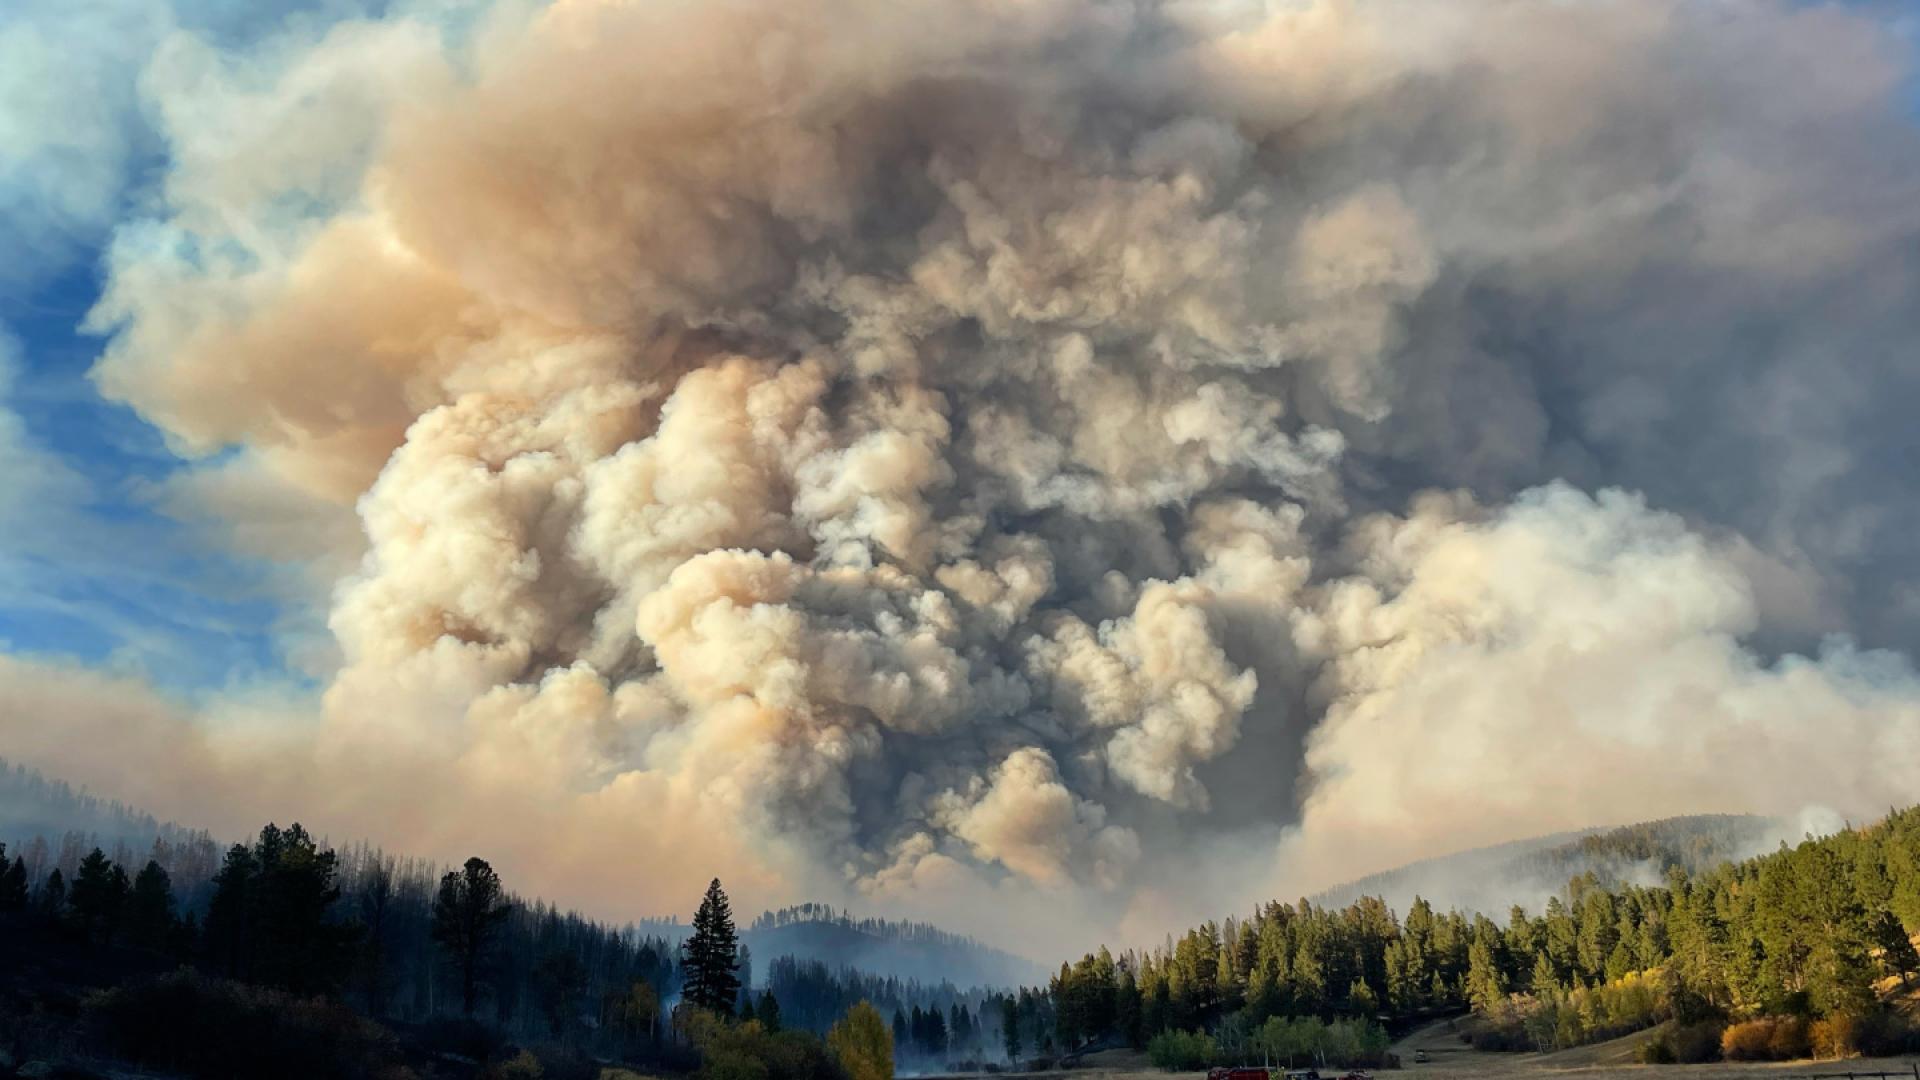 Smoke rises from the South Moccasin Fire in Montana. Photo by Lauren Kokinda, BLM